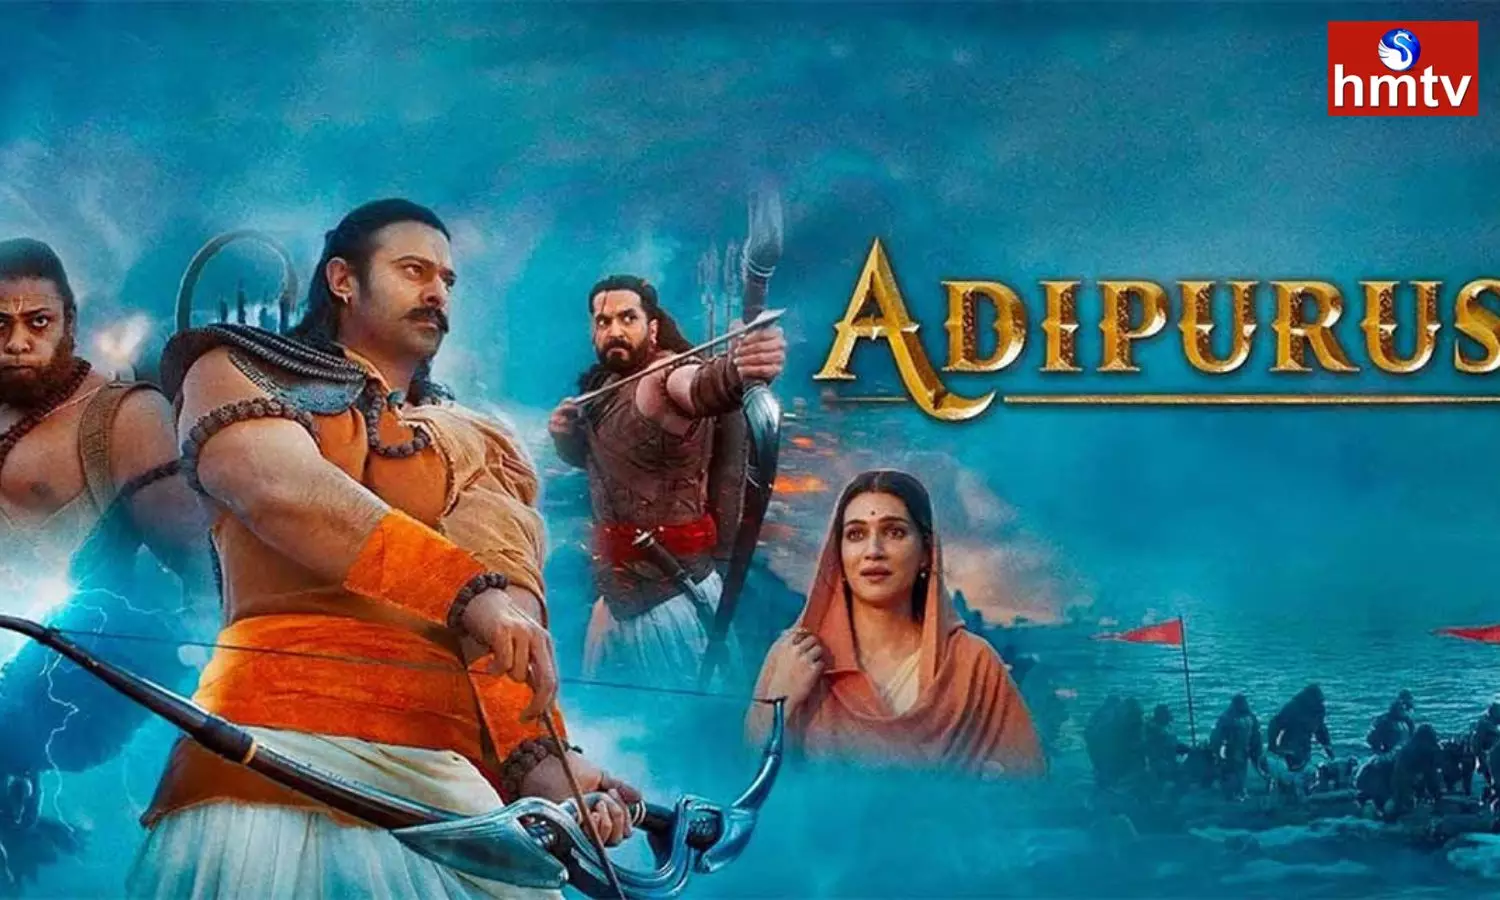 Adipurush Movie Released On Friday Across The Country